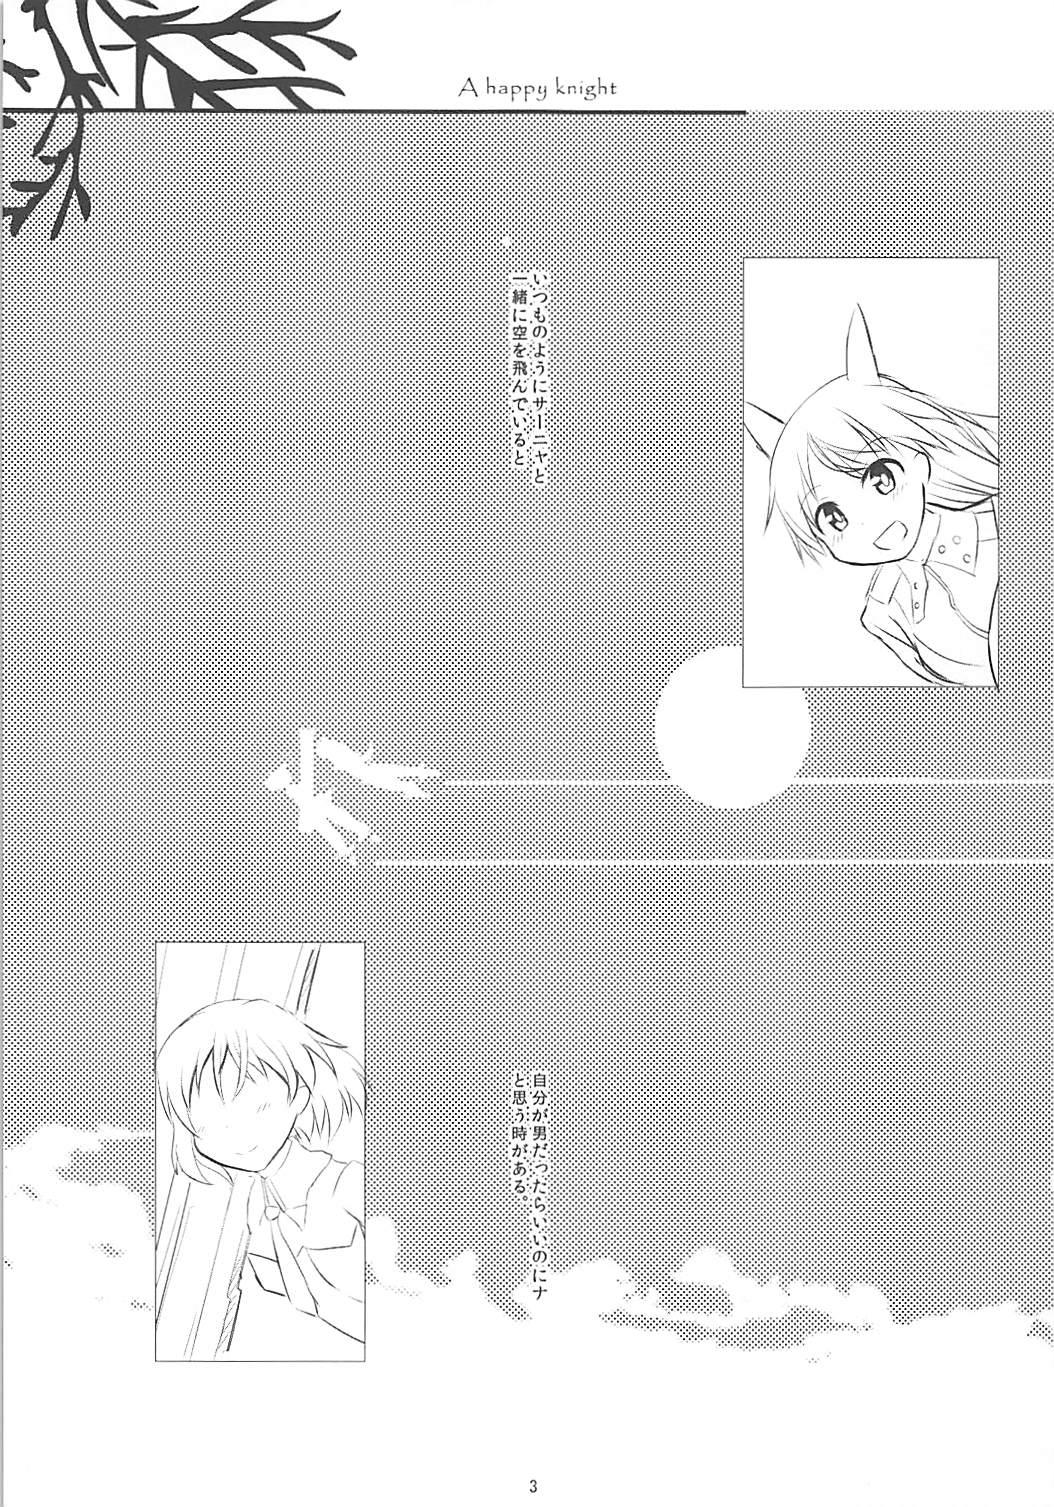 Stretching A happy knight - Strike witches Femdom Porn - Page 2